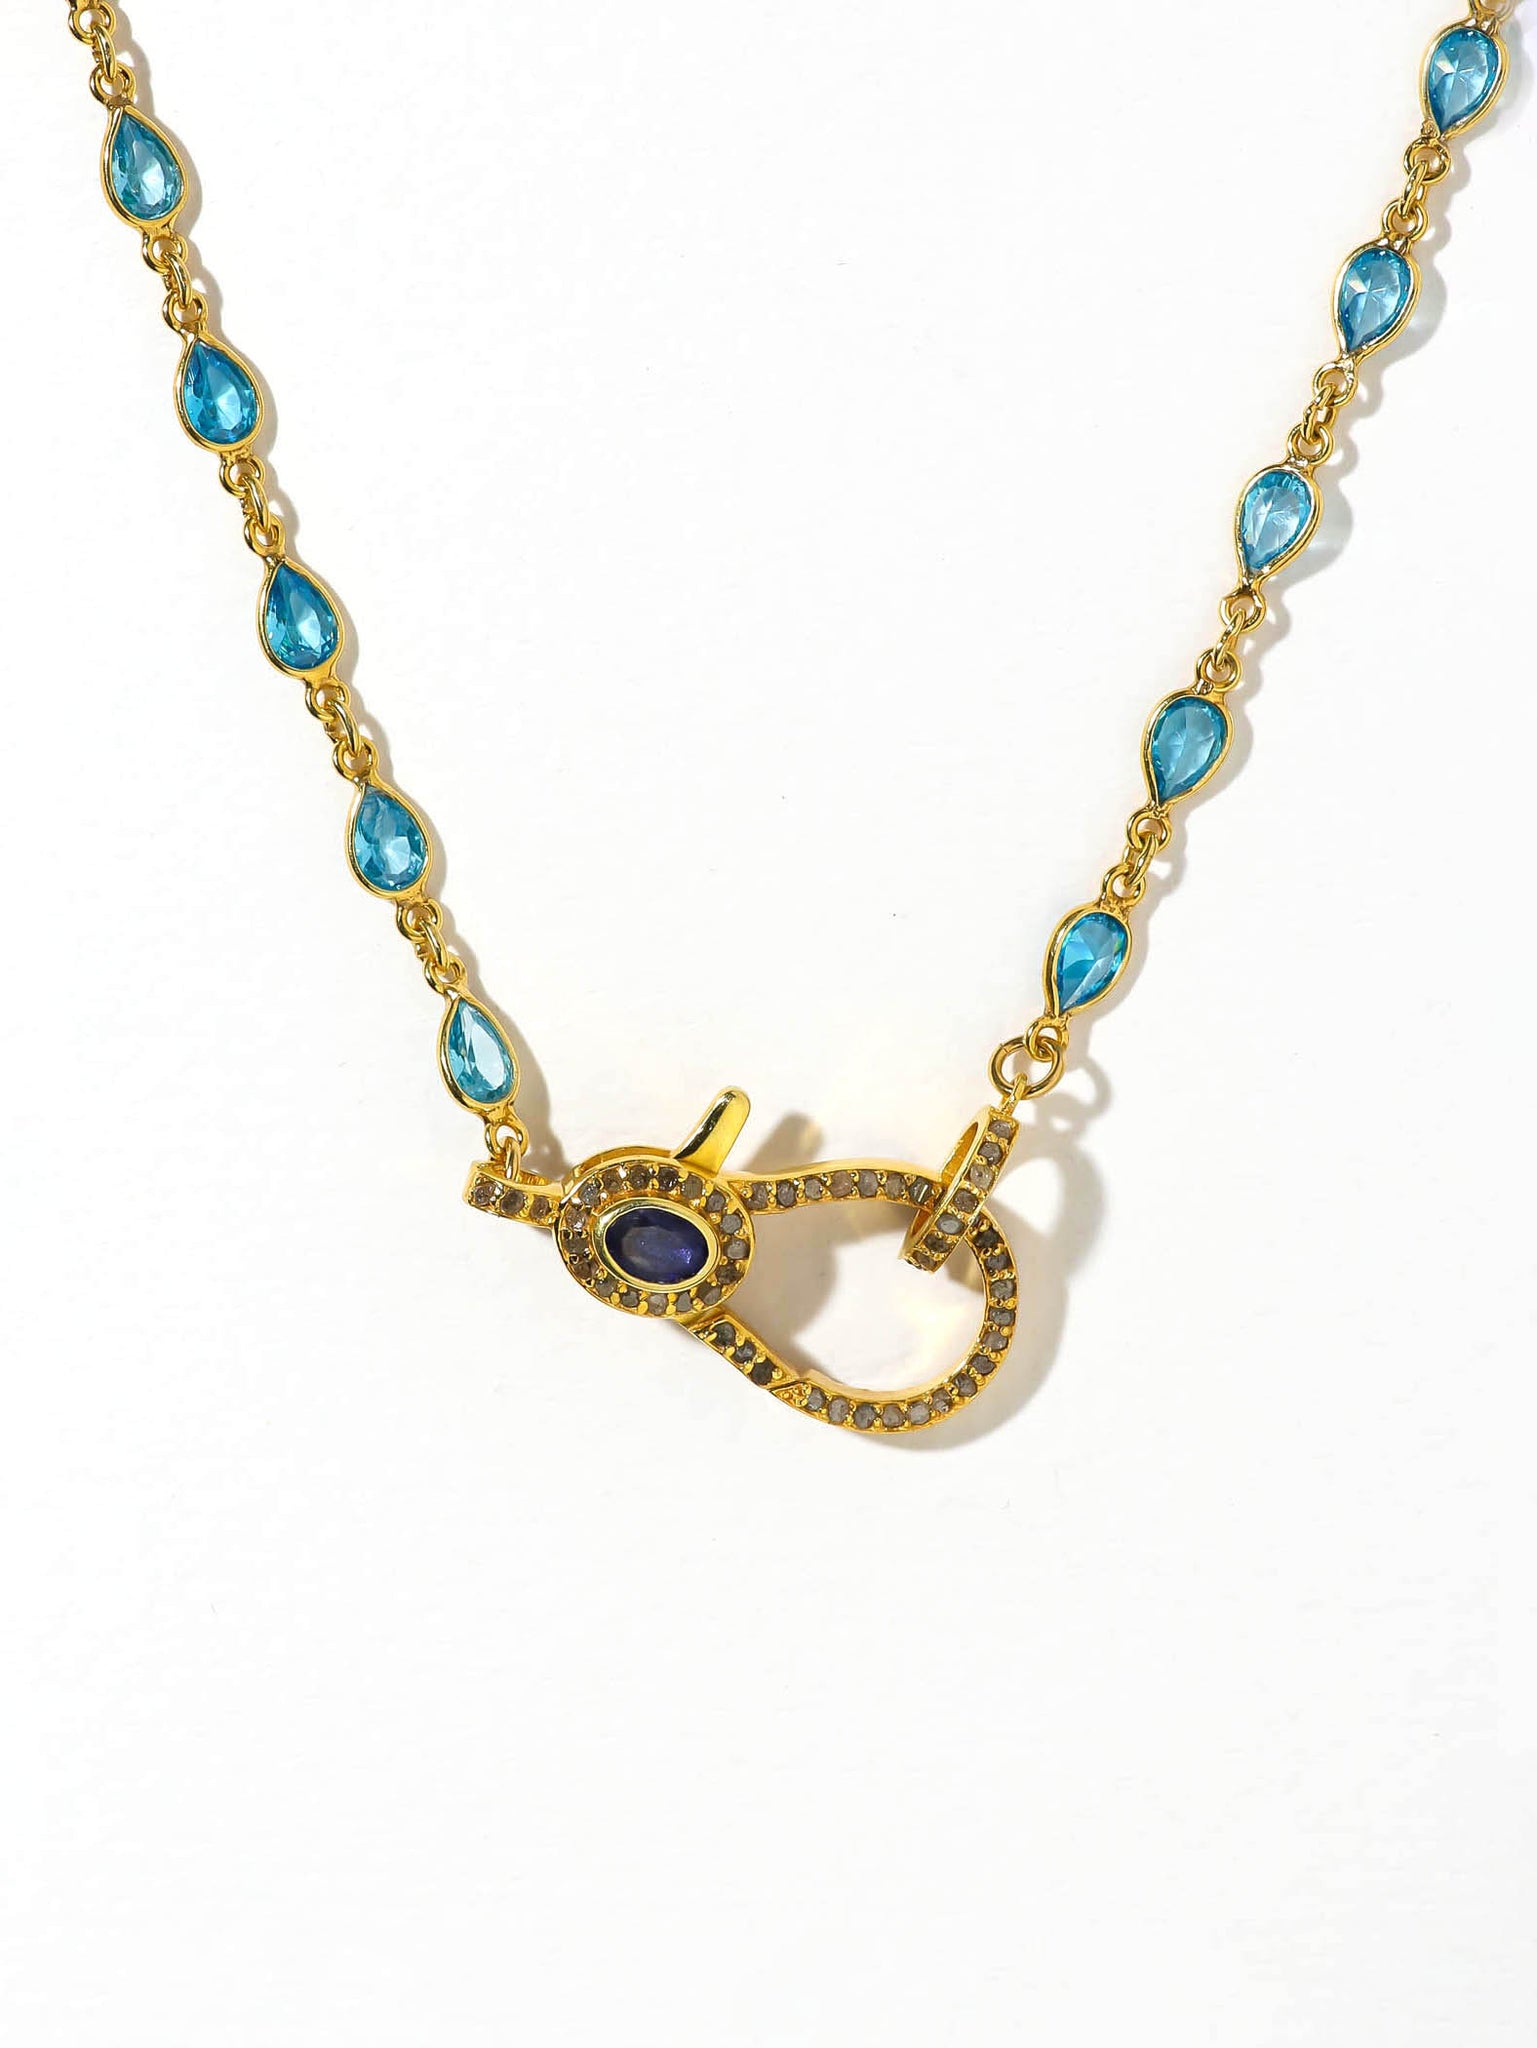 The Quila Clasp Necklace